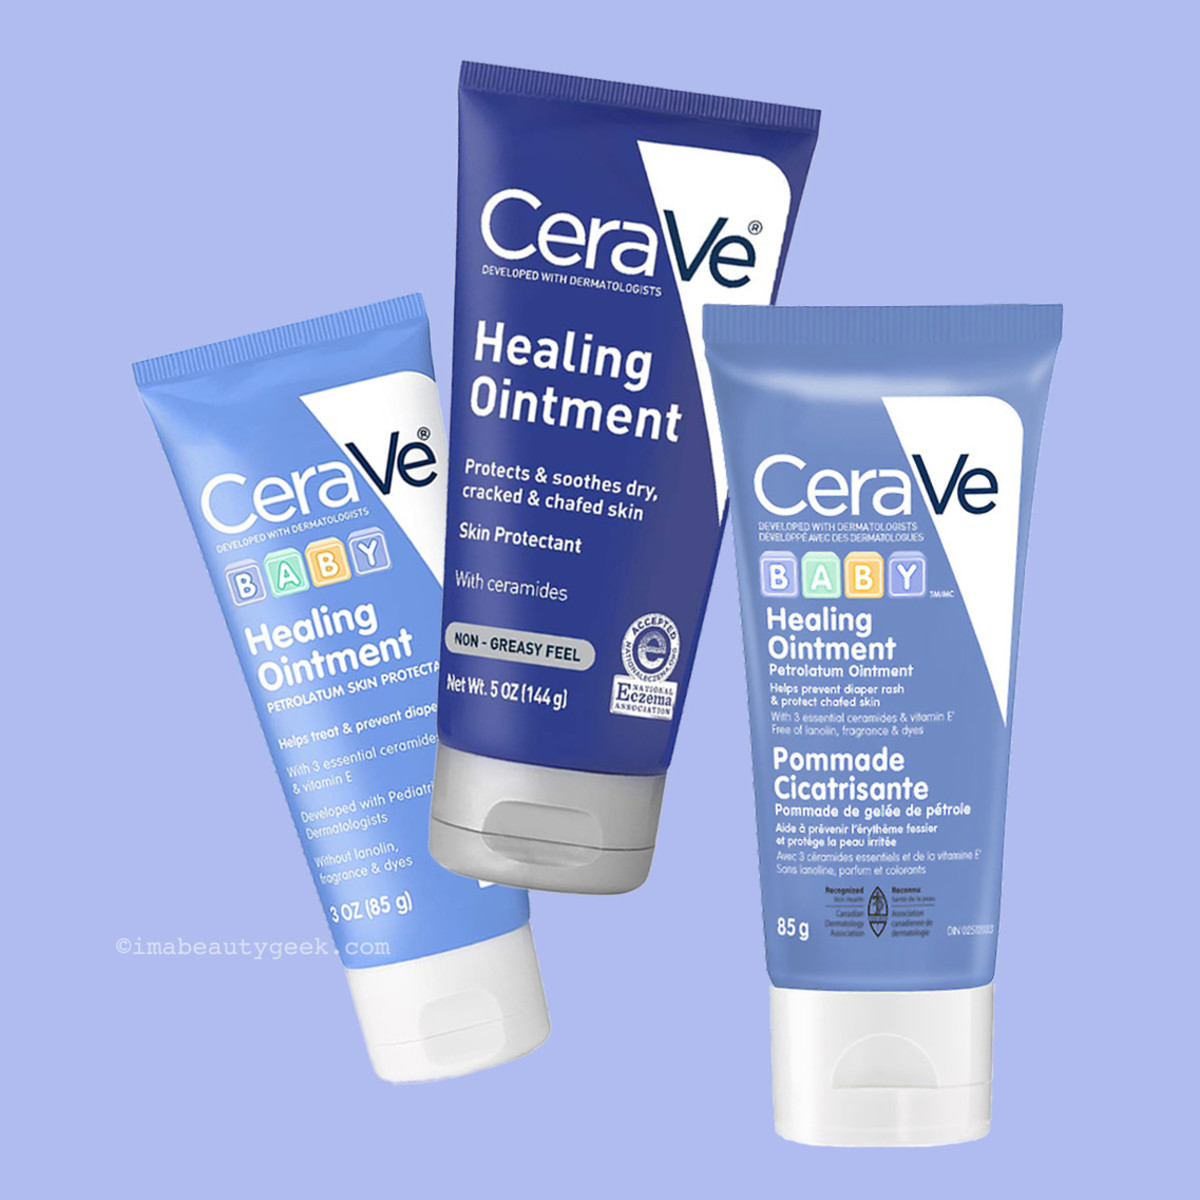 CeraVe Baby and regular CeraVe Healing Ointment tube packaging in the US, and Canada's CeraVe Baby Healing Ointment, avec bilingual packaging.